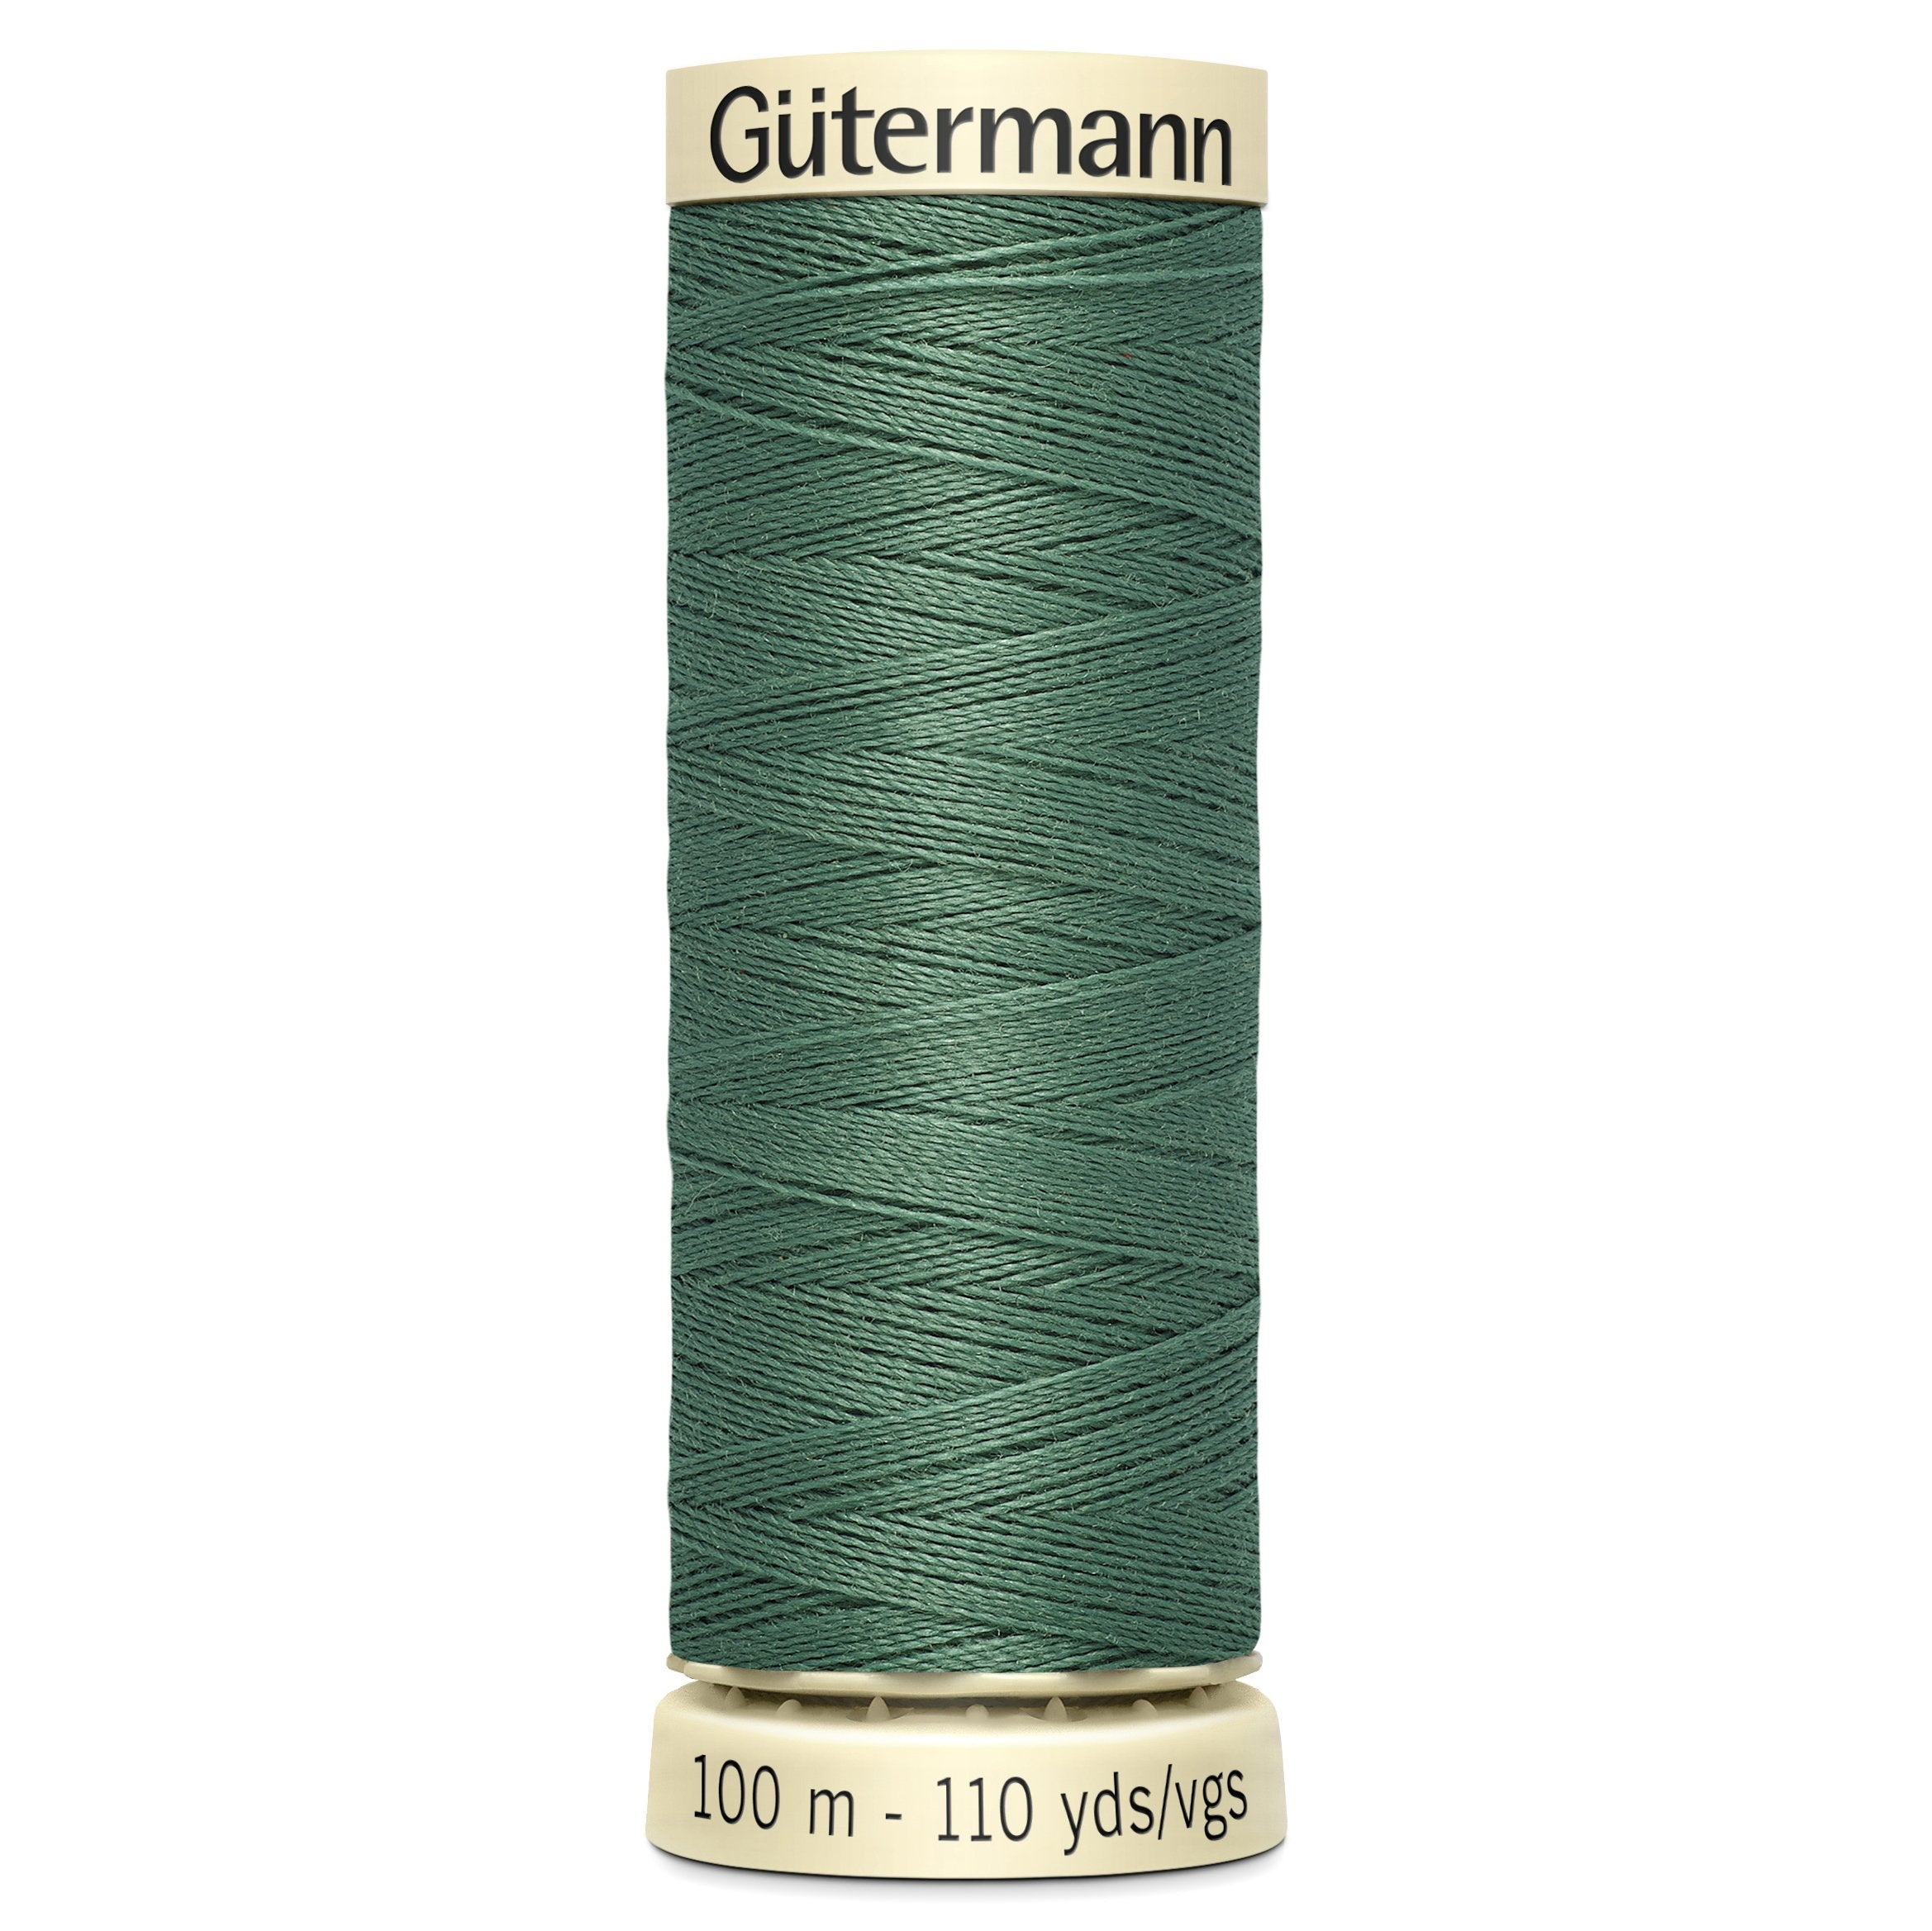 Gutermann Sew All Thread colour 553 Grey Green from Jaycotts Sewing Supplies